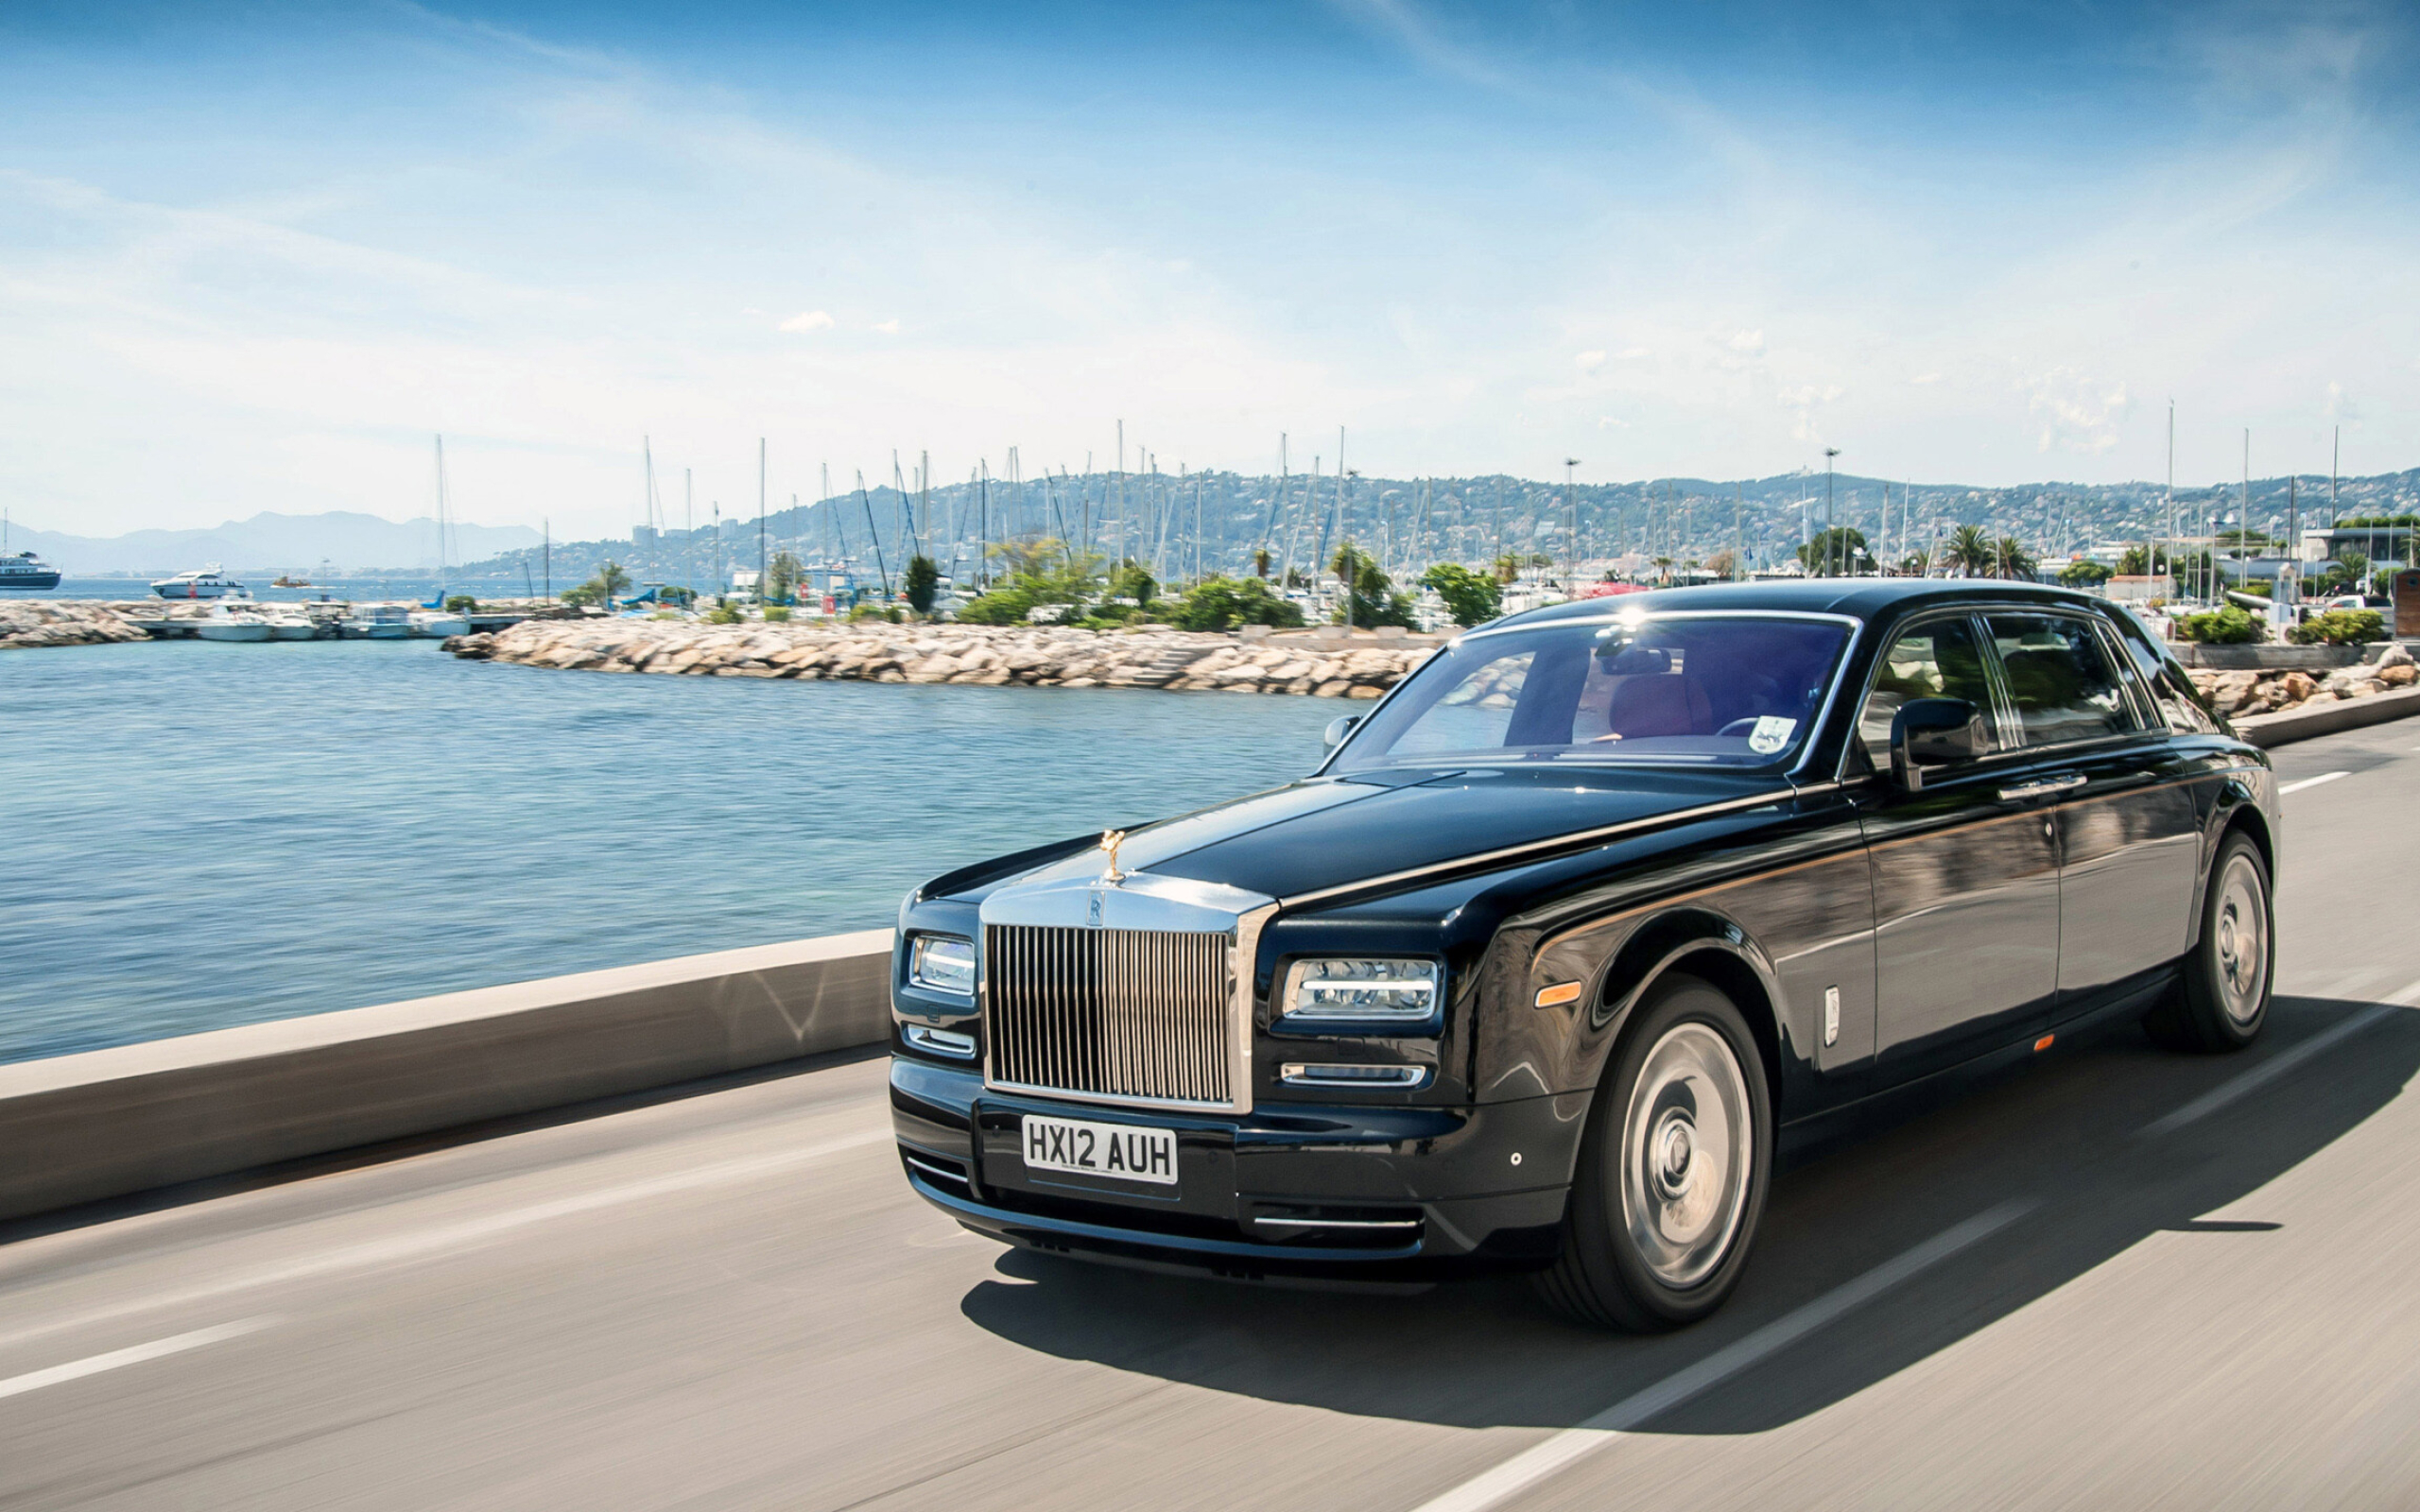 Rolls-Royce: Phantom, the current flagship model made by British car manufacturer. 2560x1600 HD Wallpaper.